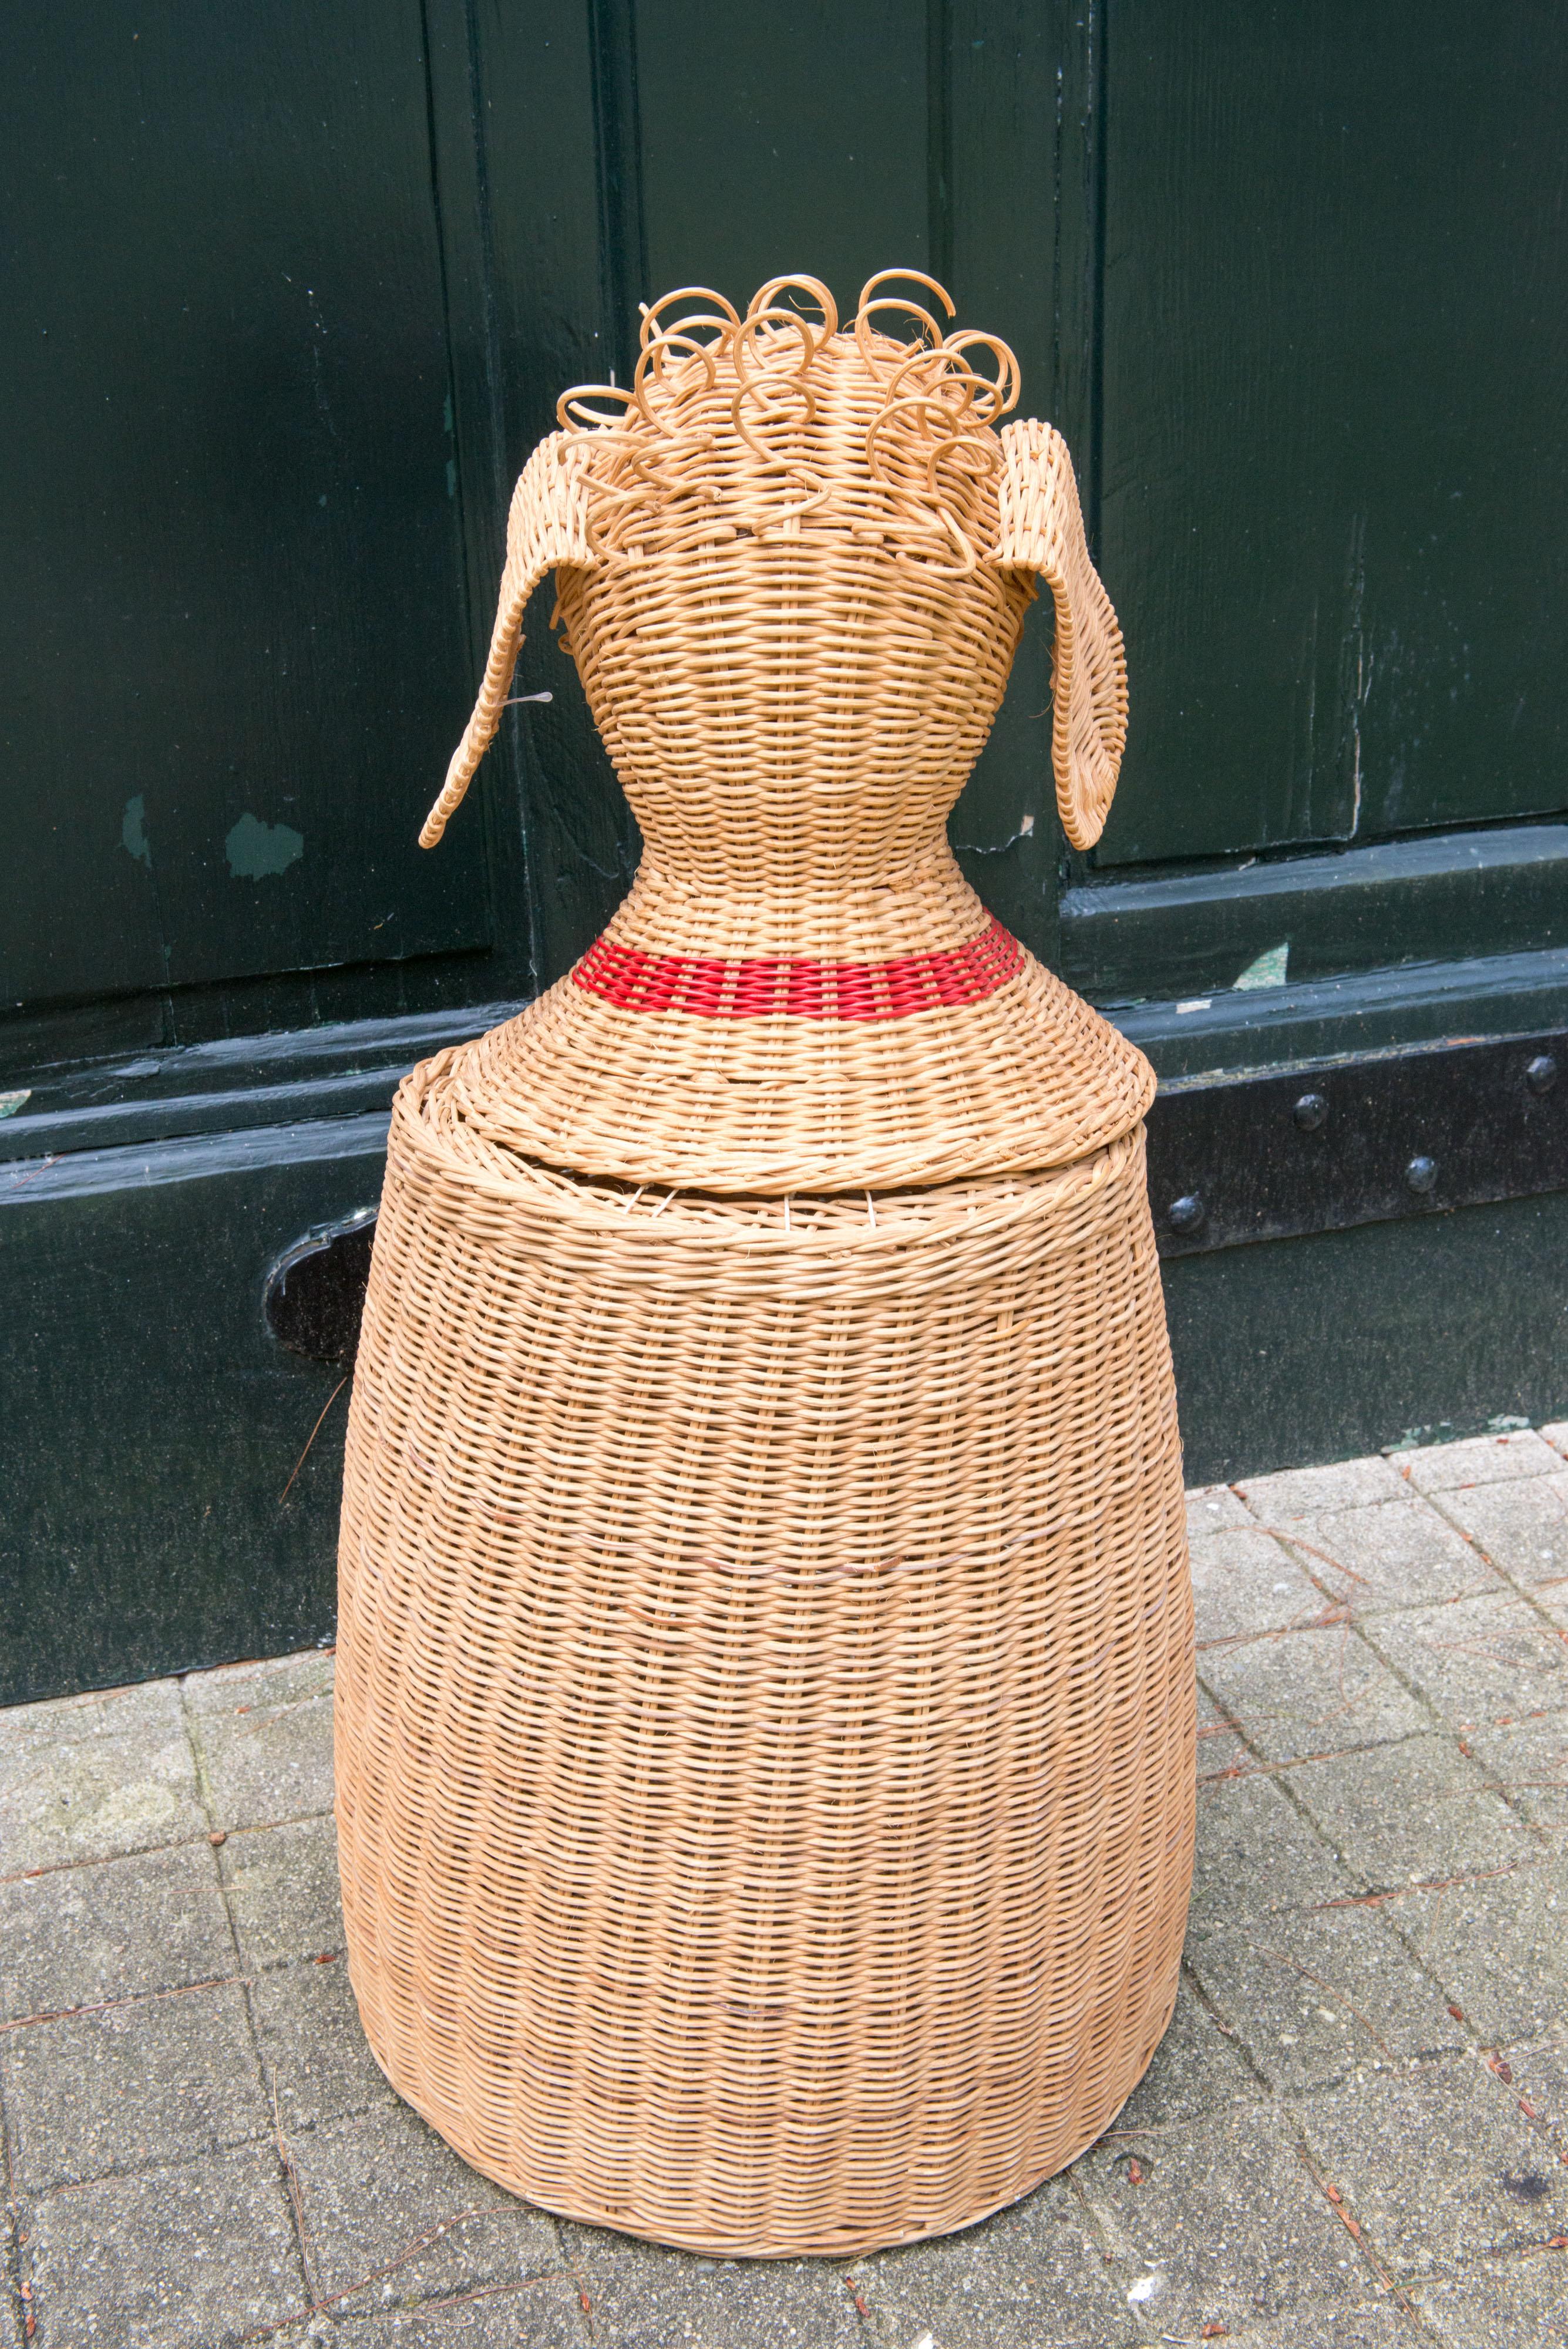 Wicker Dog Shaped Basket In Good Condition For Sale In Stamford, CT